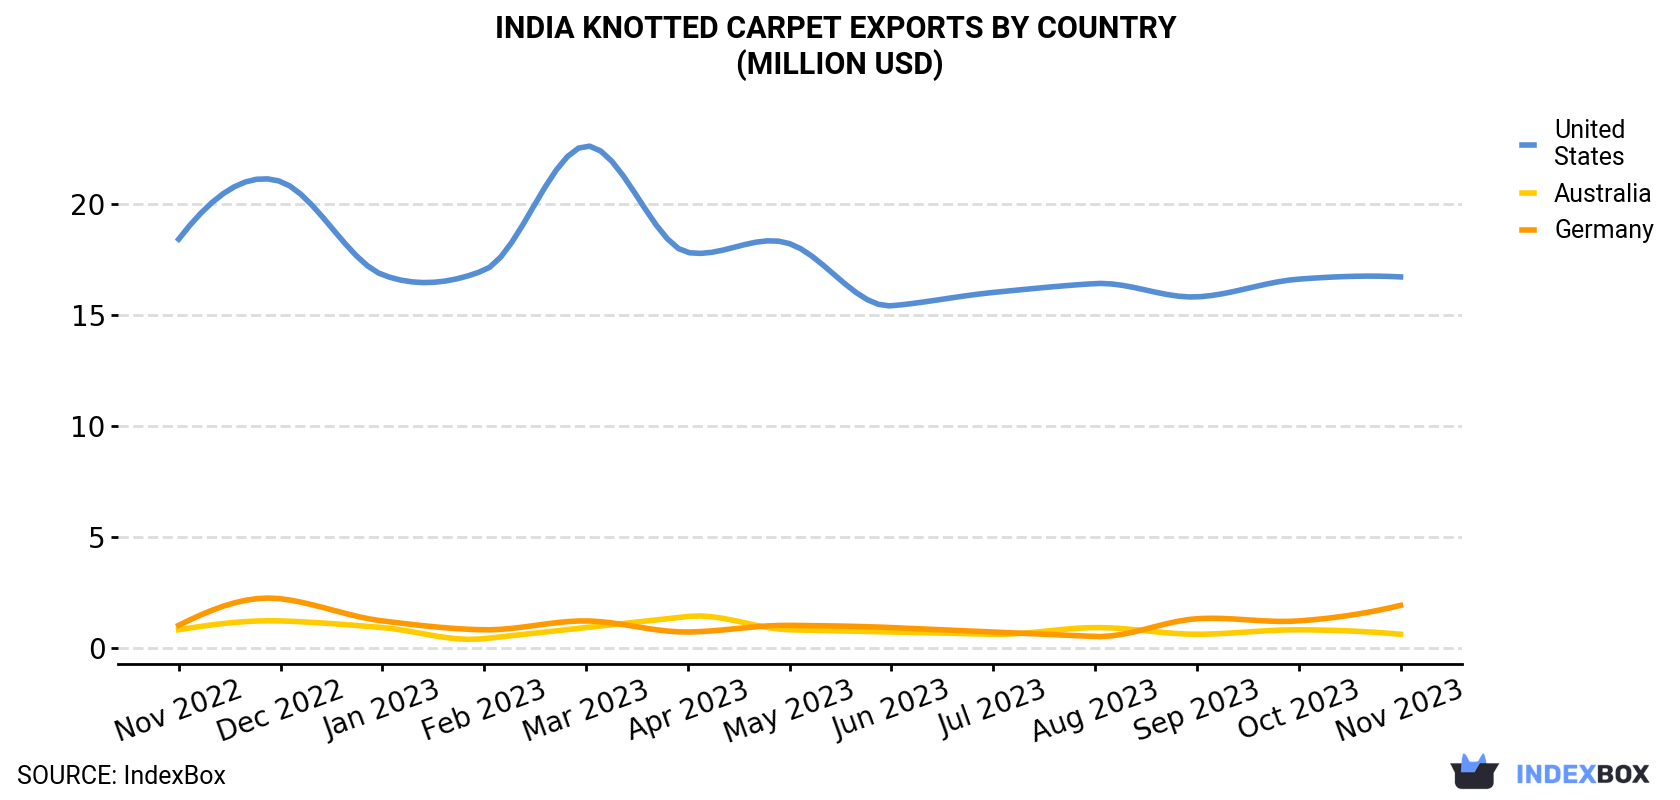 India Knotted Carpet Exports By Country (Million USD)